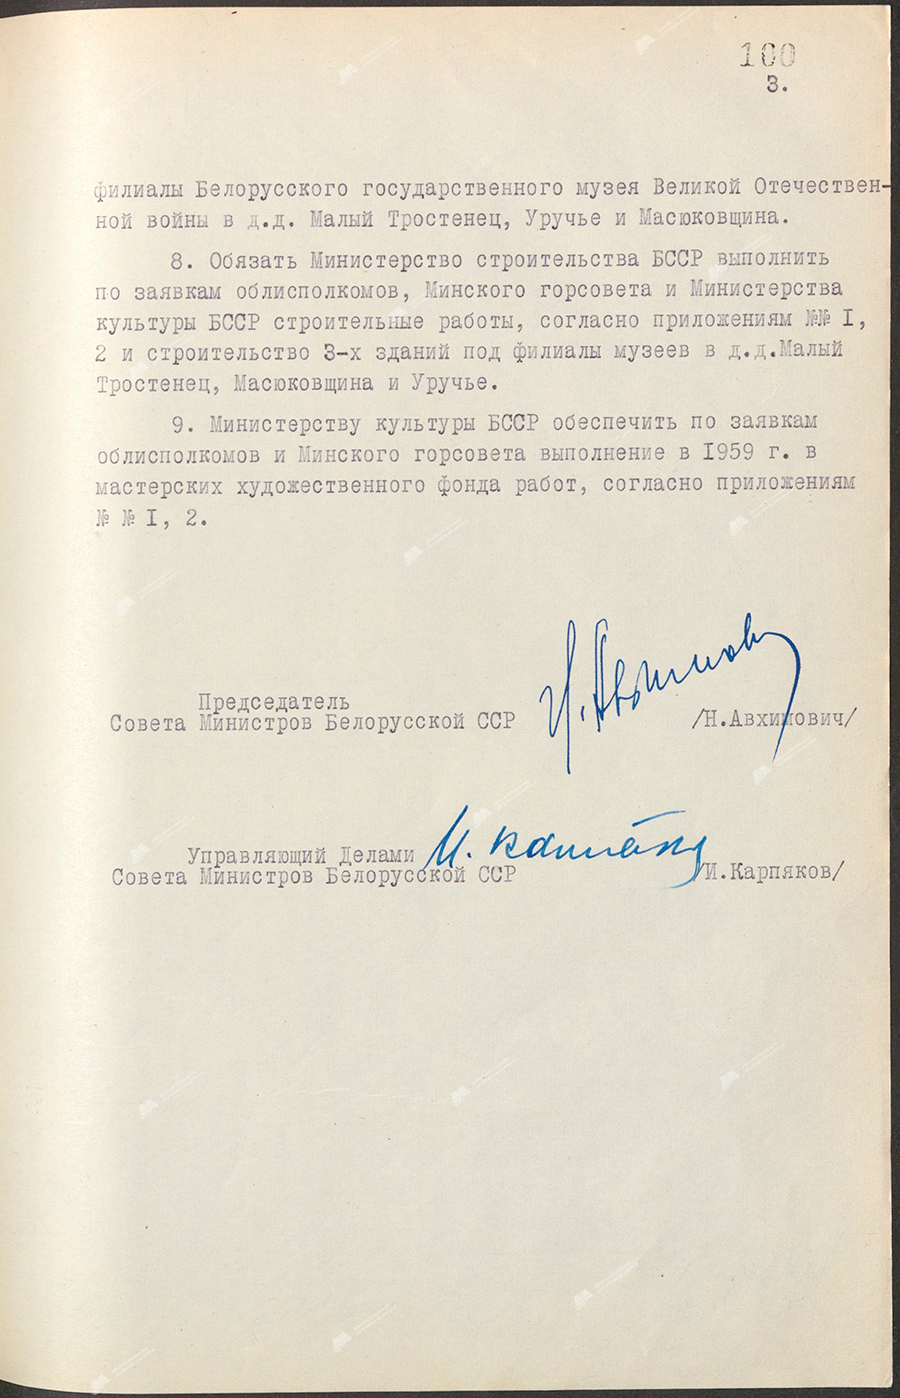 Resolution No. 248 of the Council of Ministers of the BSSR «On the improvement of burial places of soldiers of the Soviet Army, partisans and civilians who died in 1941 – 1945.» and on the perpetuation of significant places and events associated with the Great Patriotic War on the territory of the Belarusian SSR»-с. 2